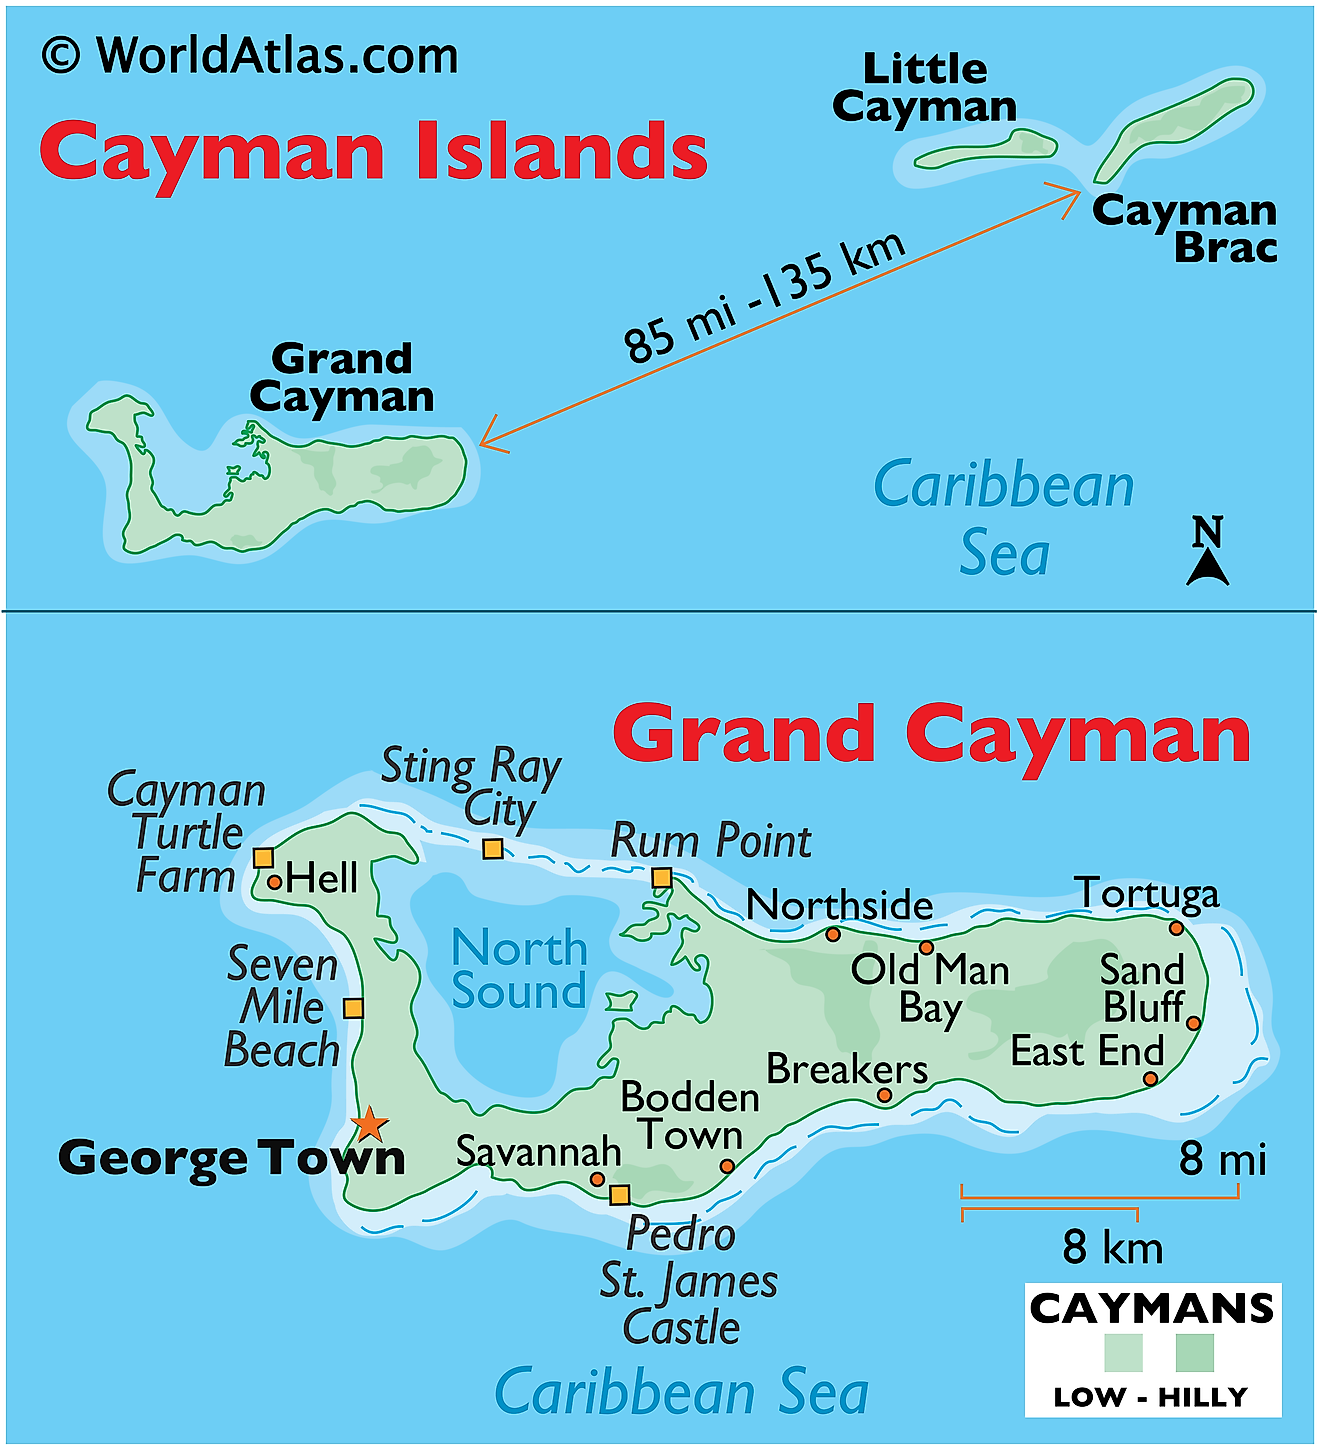 Physical map of Cayman Islands showing the terrain, Caribbean Sea and North Sounds, important settlements, etc.